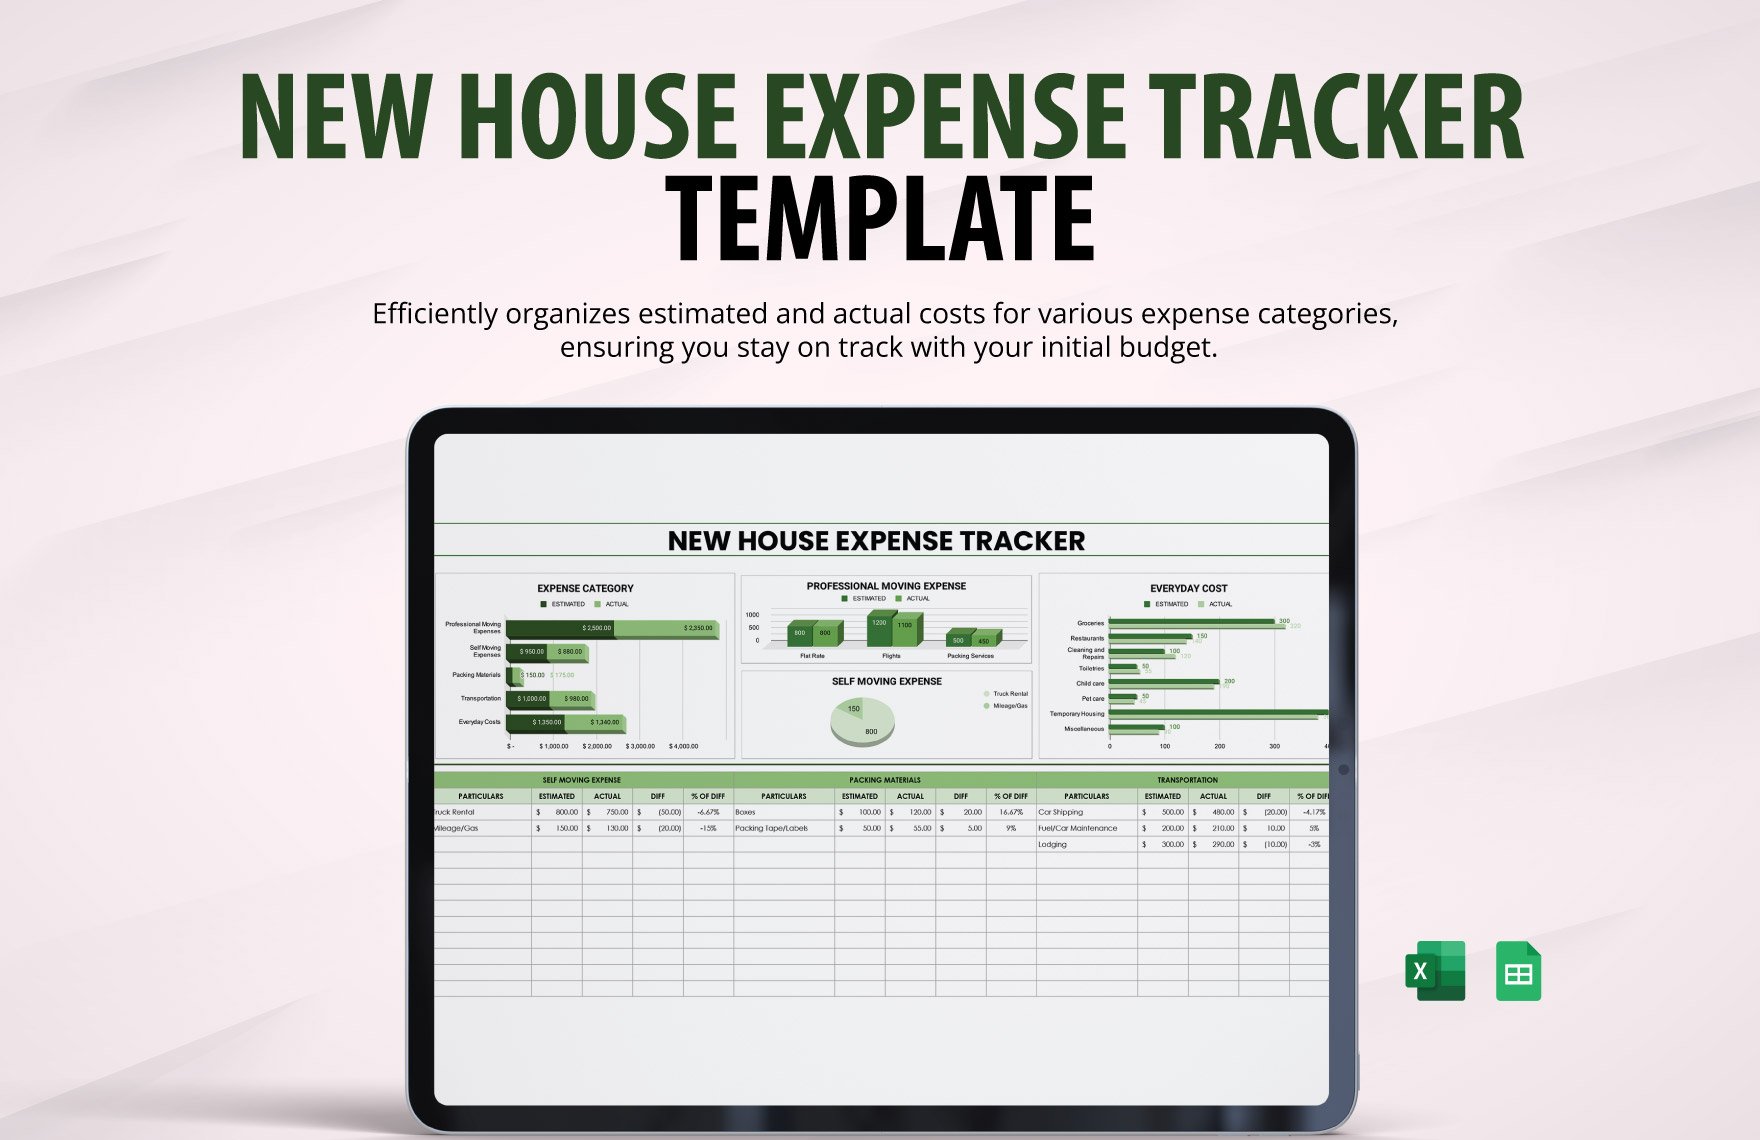 New House Expense Tracker Template in Excel, Google Sheets, Adobe XD